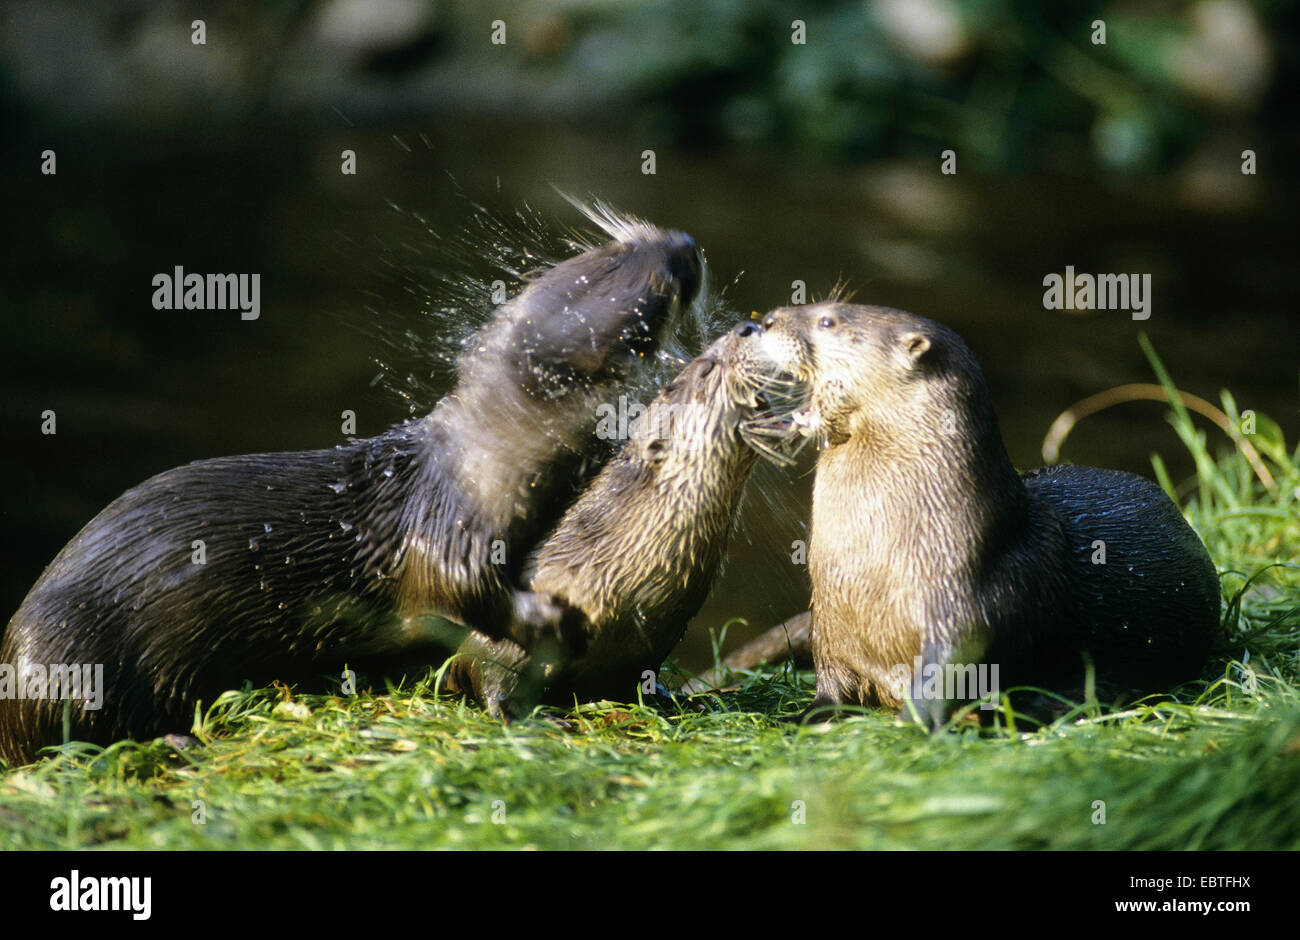 European river otter, European Otter, Eurasian Otter (Lutra lutra), young otters playing together, Germany Stock Photo